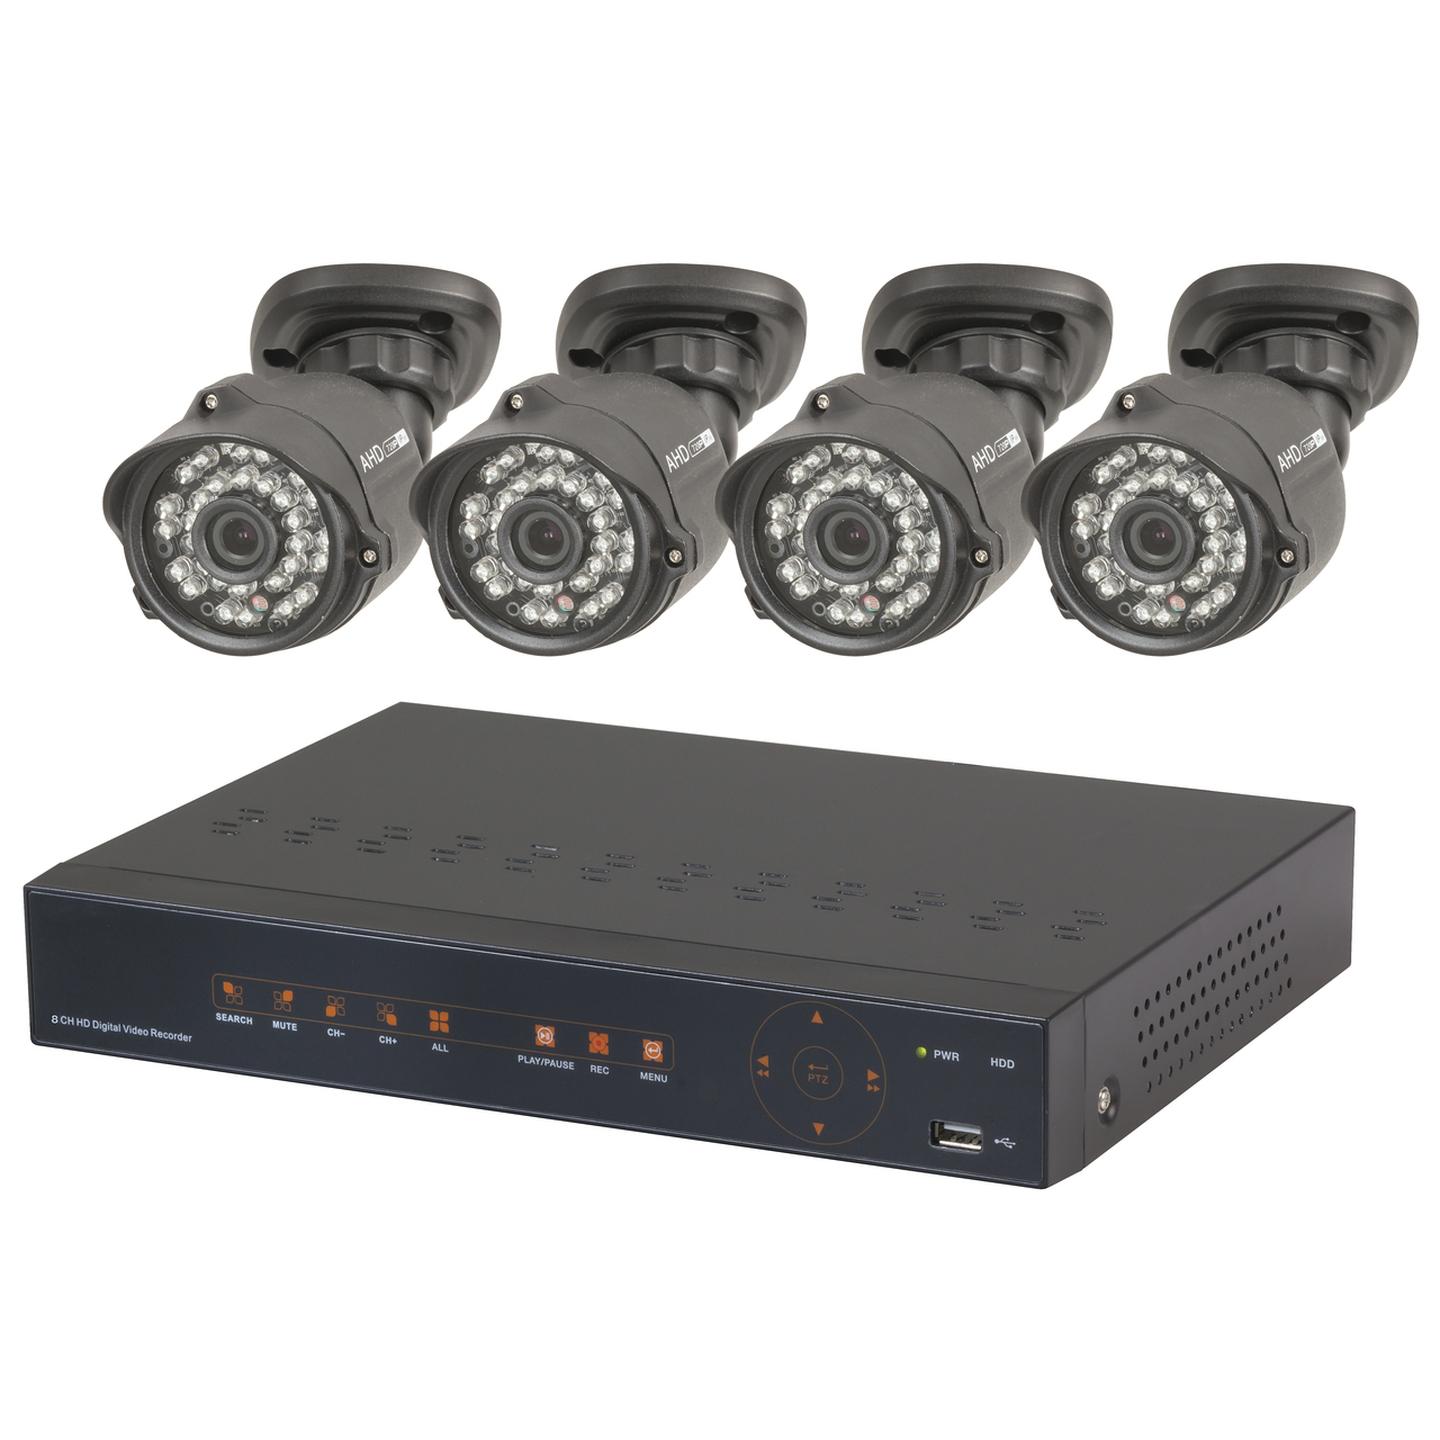 8 Channel 1080p DVR Kit with 4 x 1080p Cameras